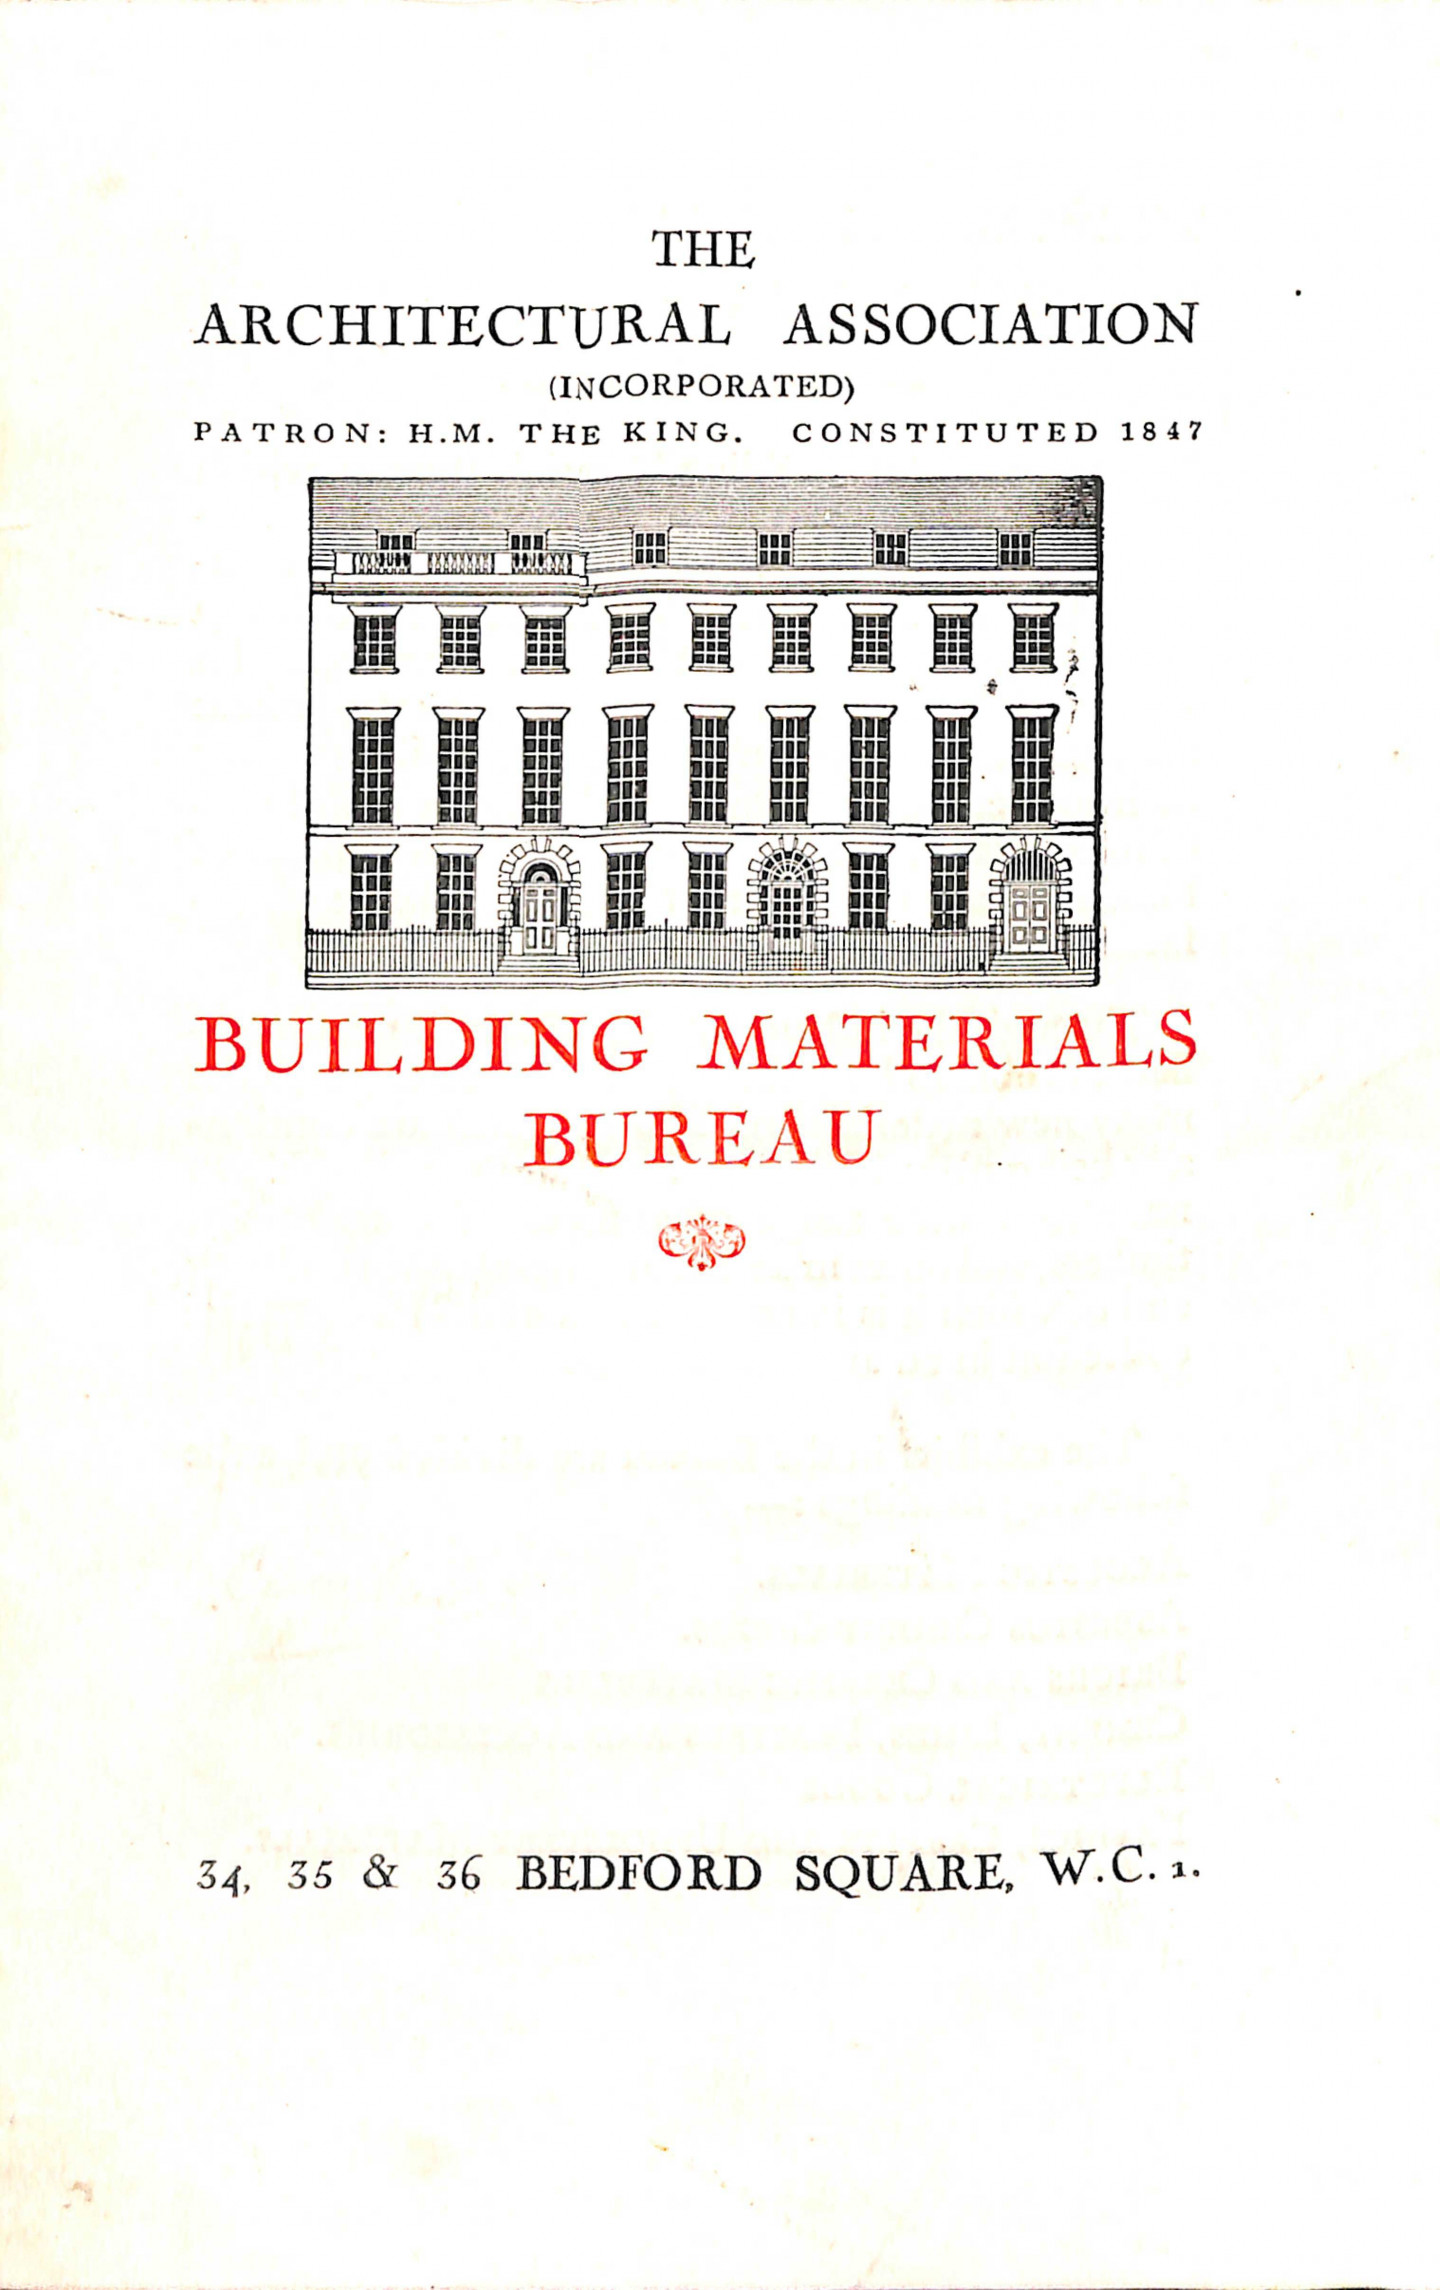 Manual for AA Materials Bureau, that went on to become the Building Centre, 1928